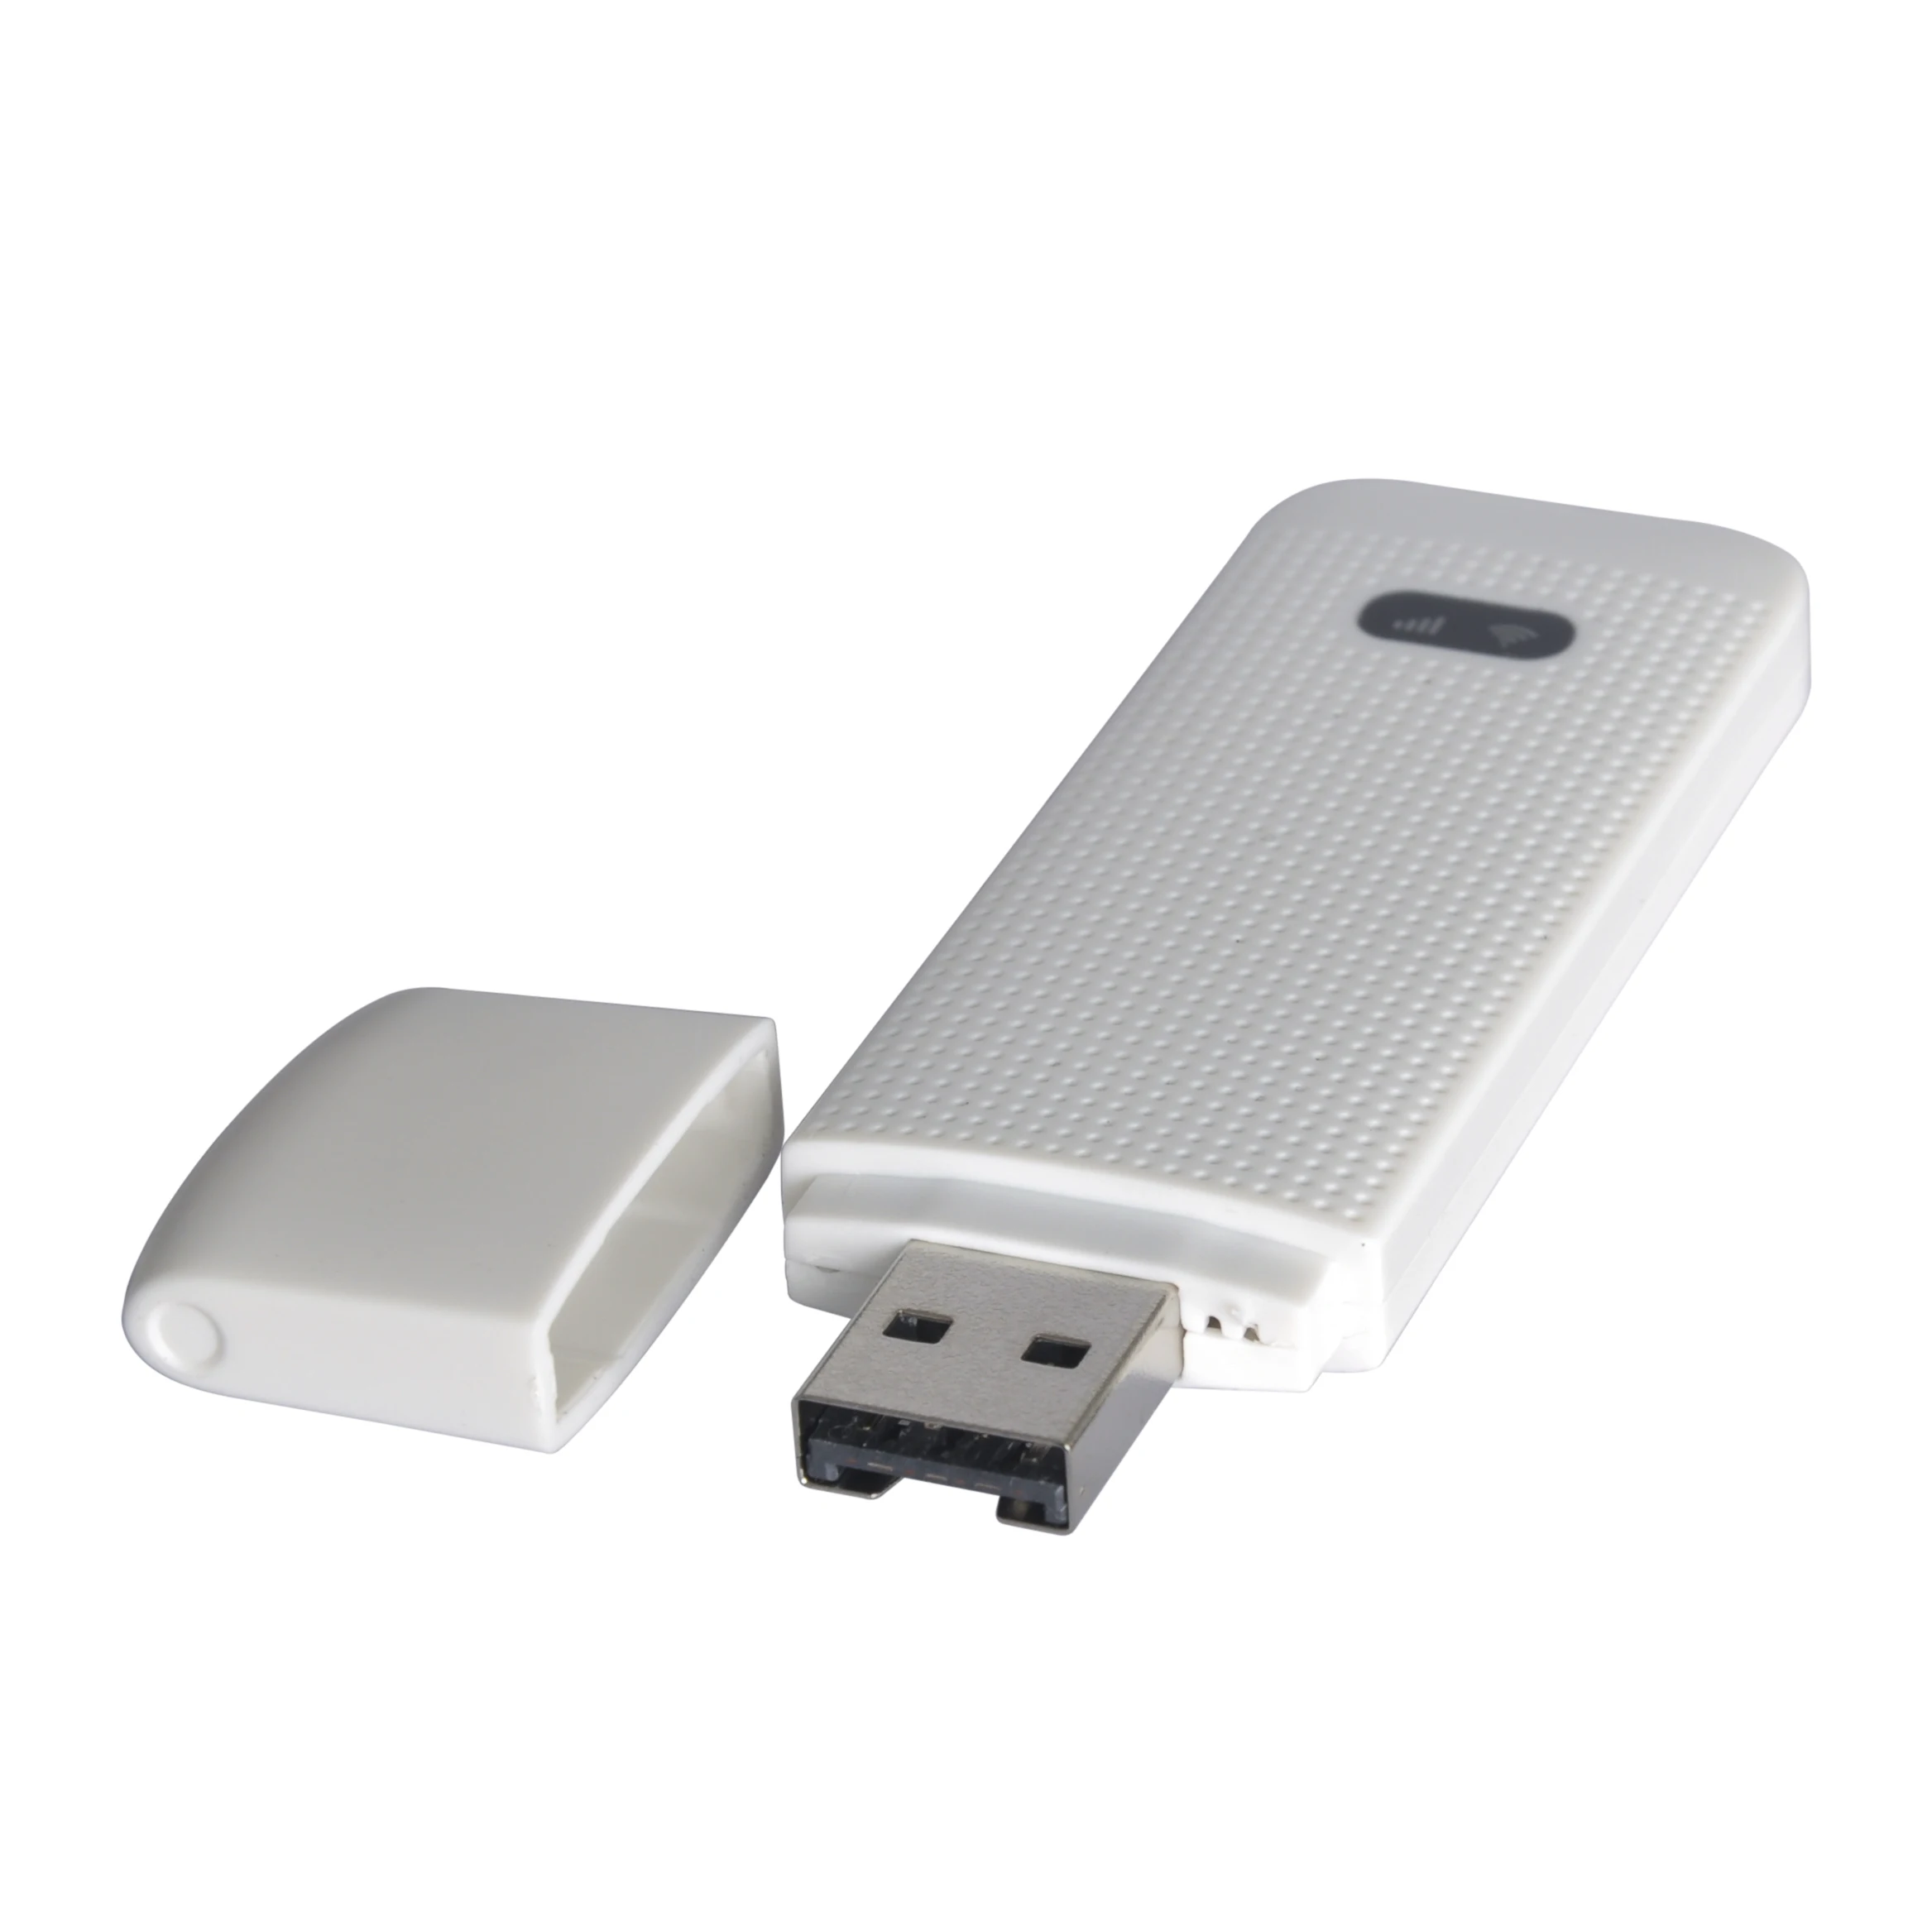 Observation frihed Vælge Source Nano SIM in USB 4g lte dongle wifi mini usb modem for android on  m.alibaba.com